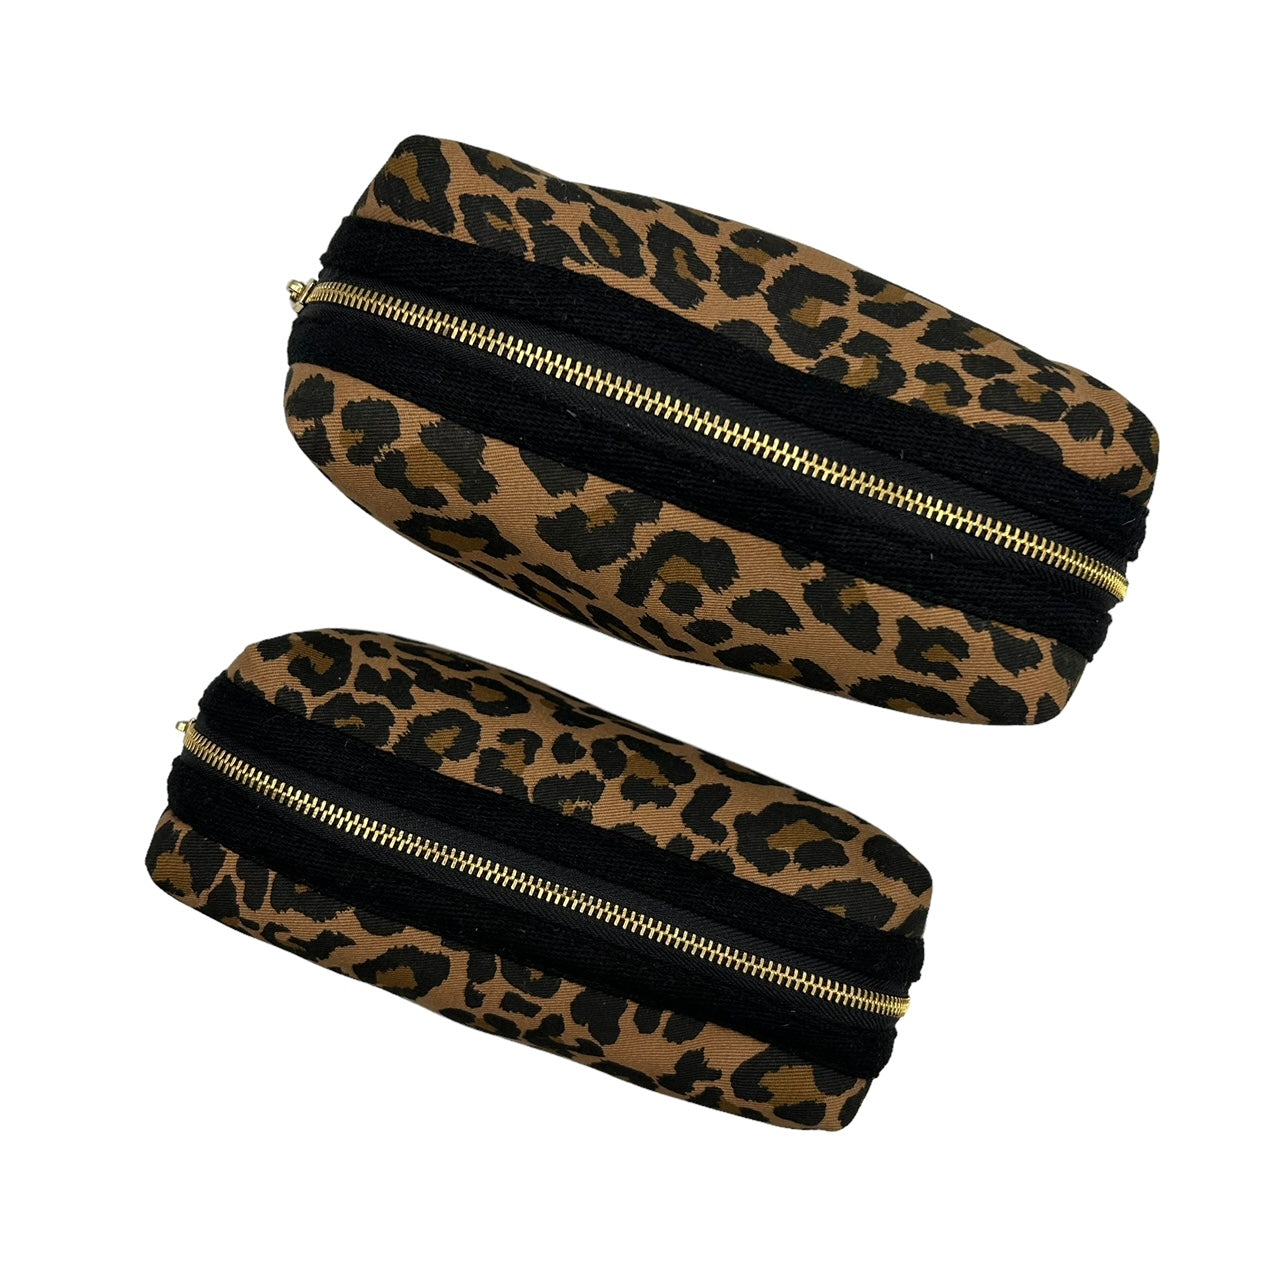 Leopard print make-up bag, large and small, with a  tiger head brooch